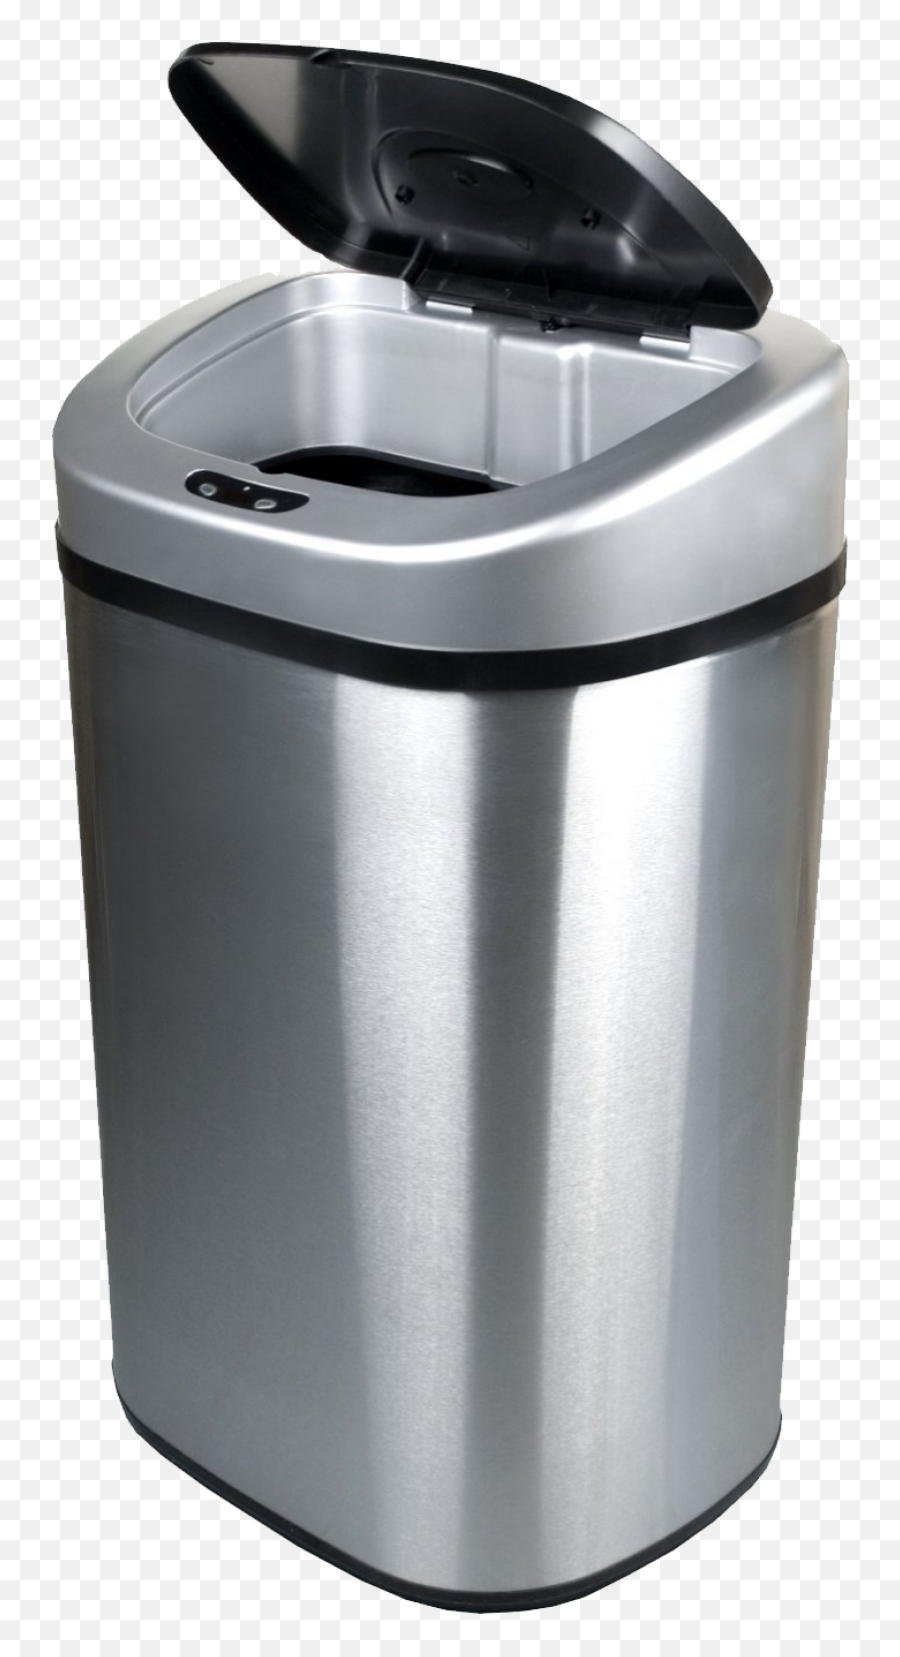 Trash Can Png Image - Kitchen Garbage Can Png,Trash Can Transparent Background